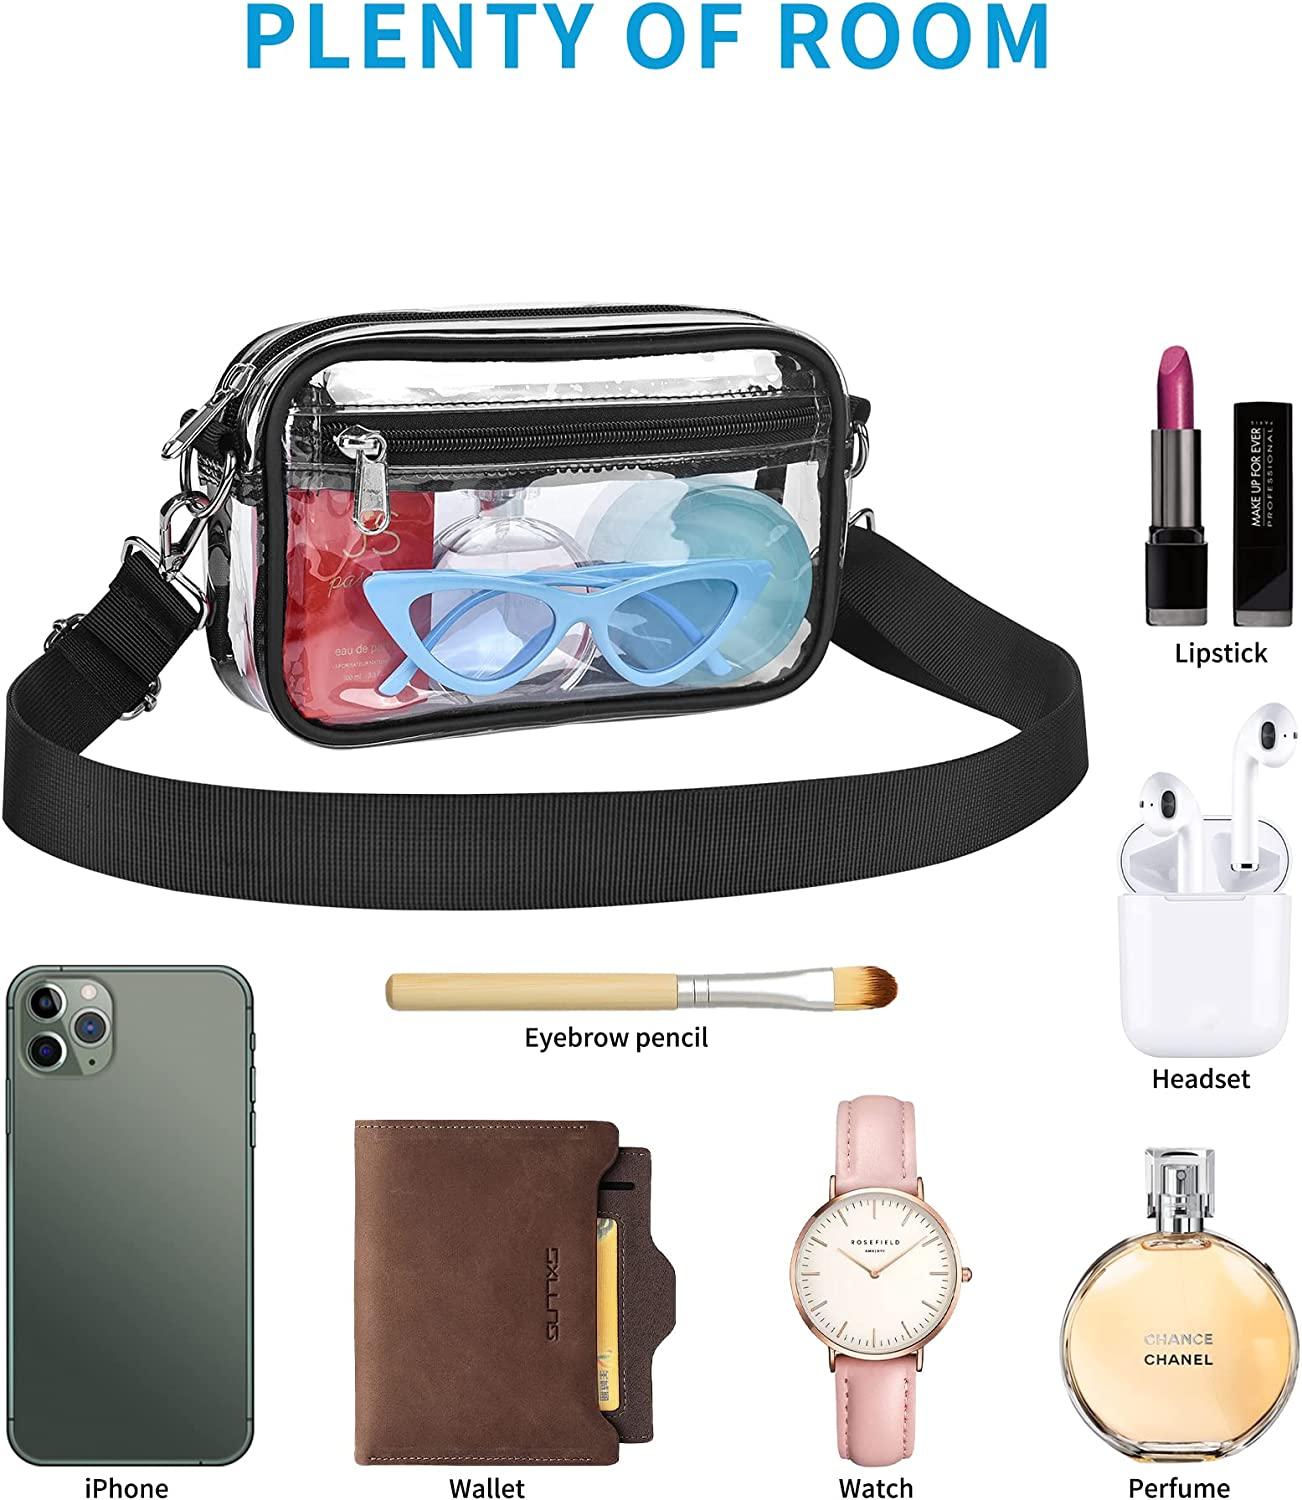 What's In My Bag: Concert Bag Edition